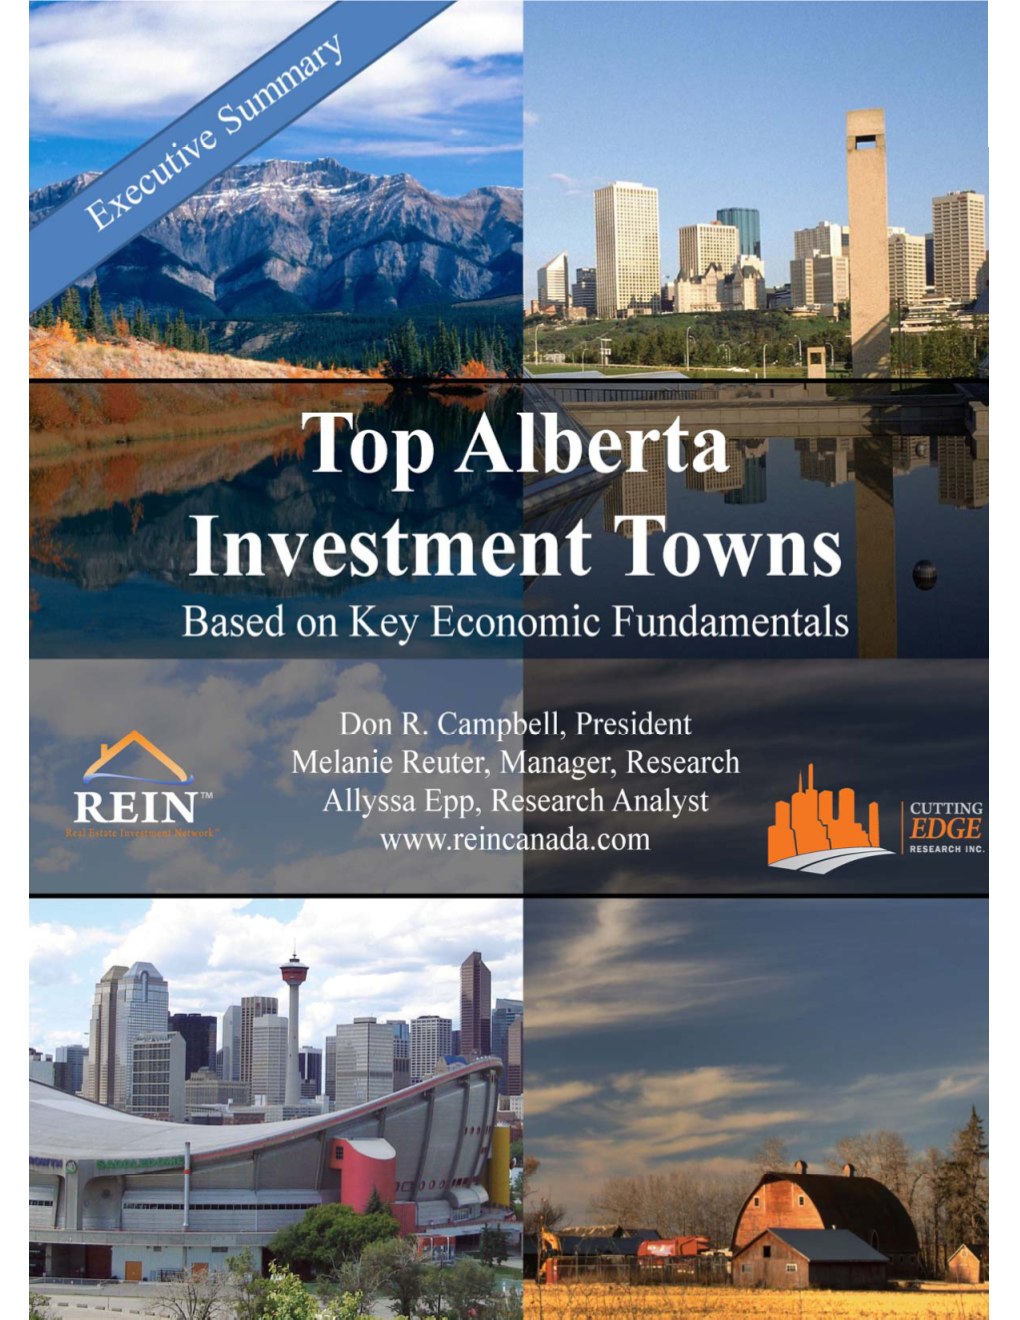 Top Alberta Investment Towns Executive Summary